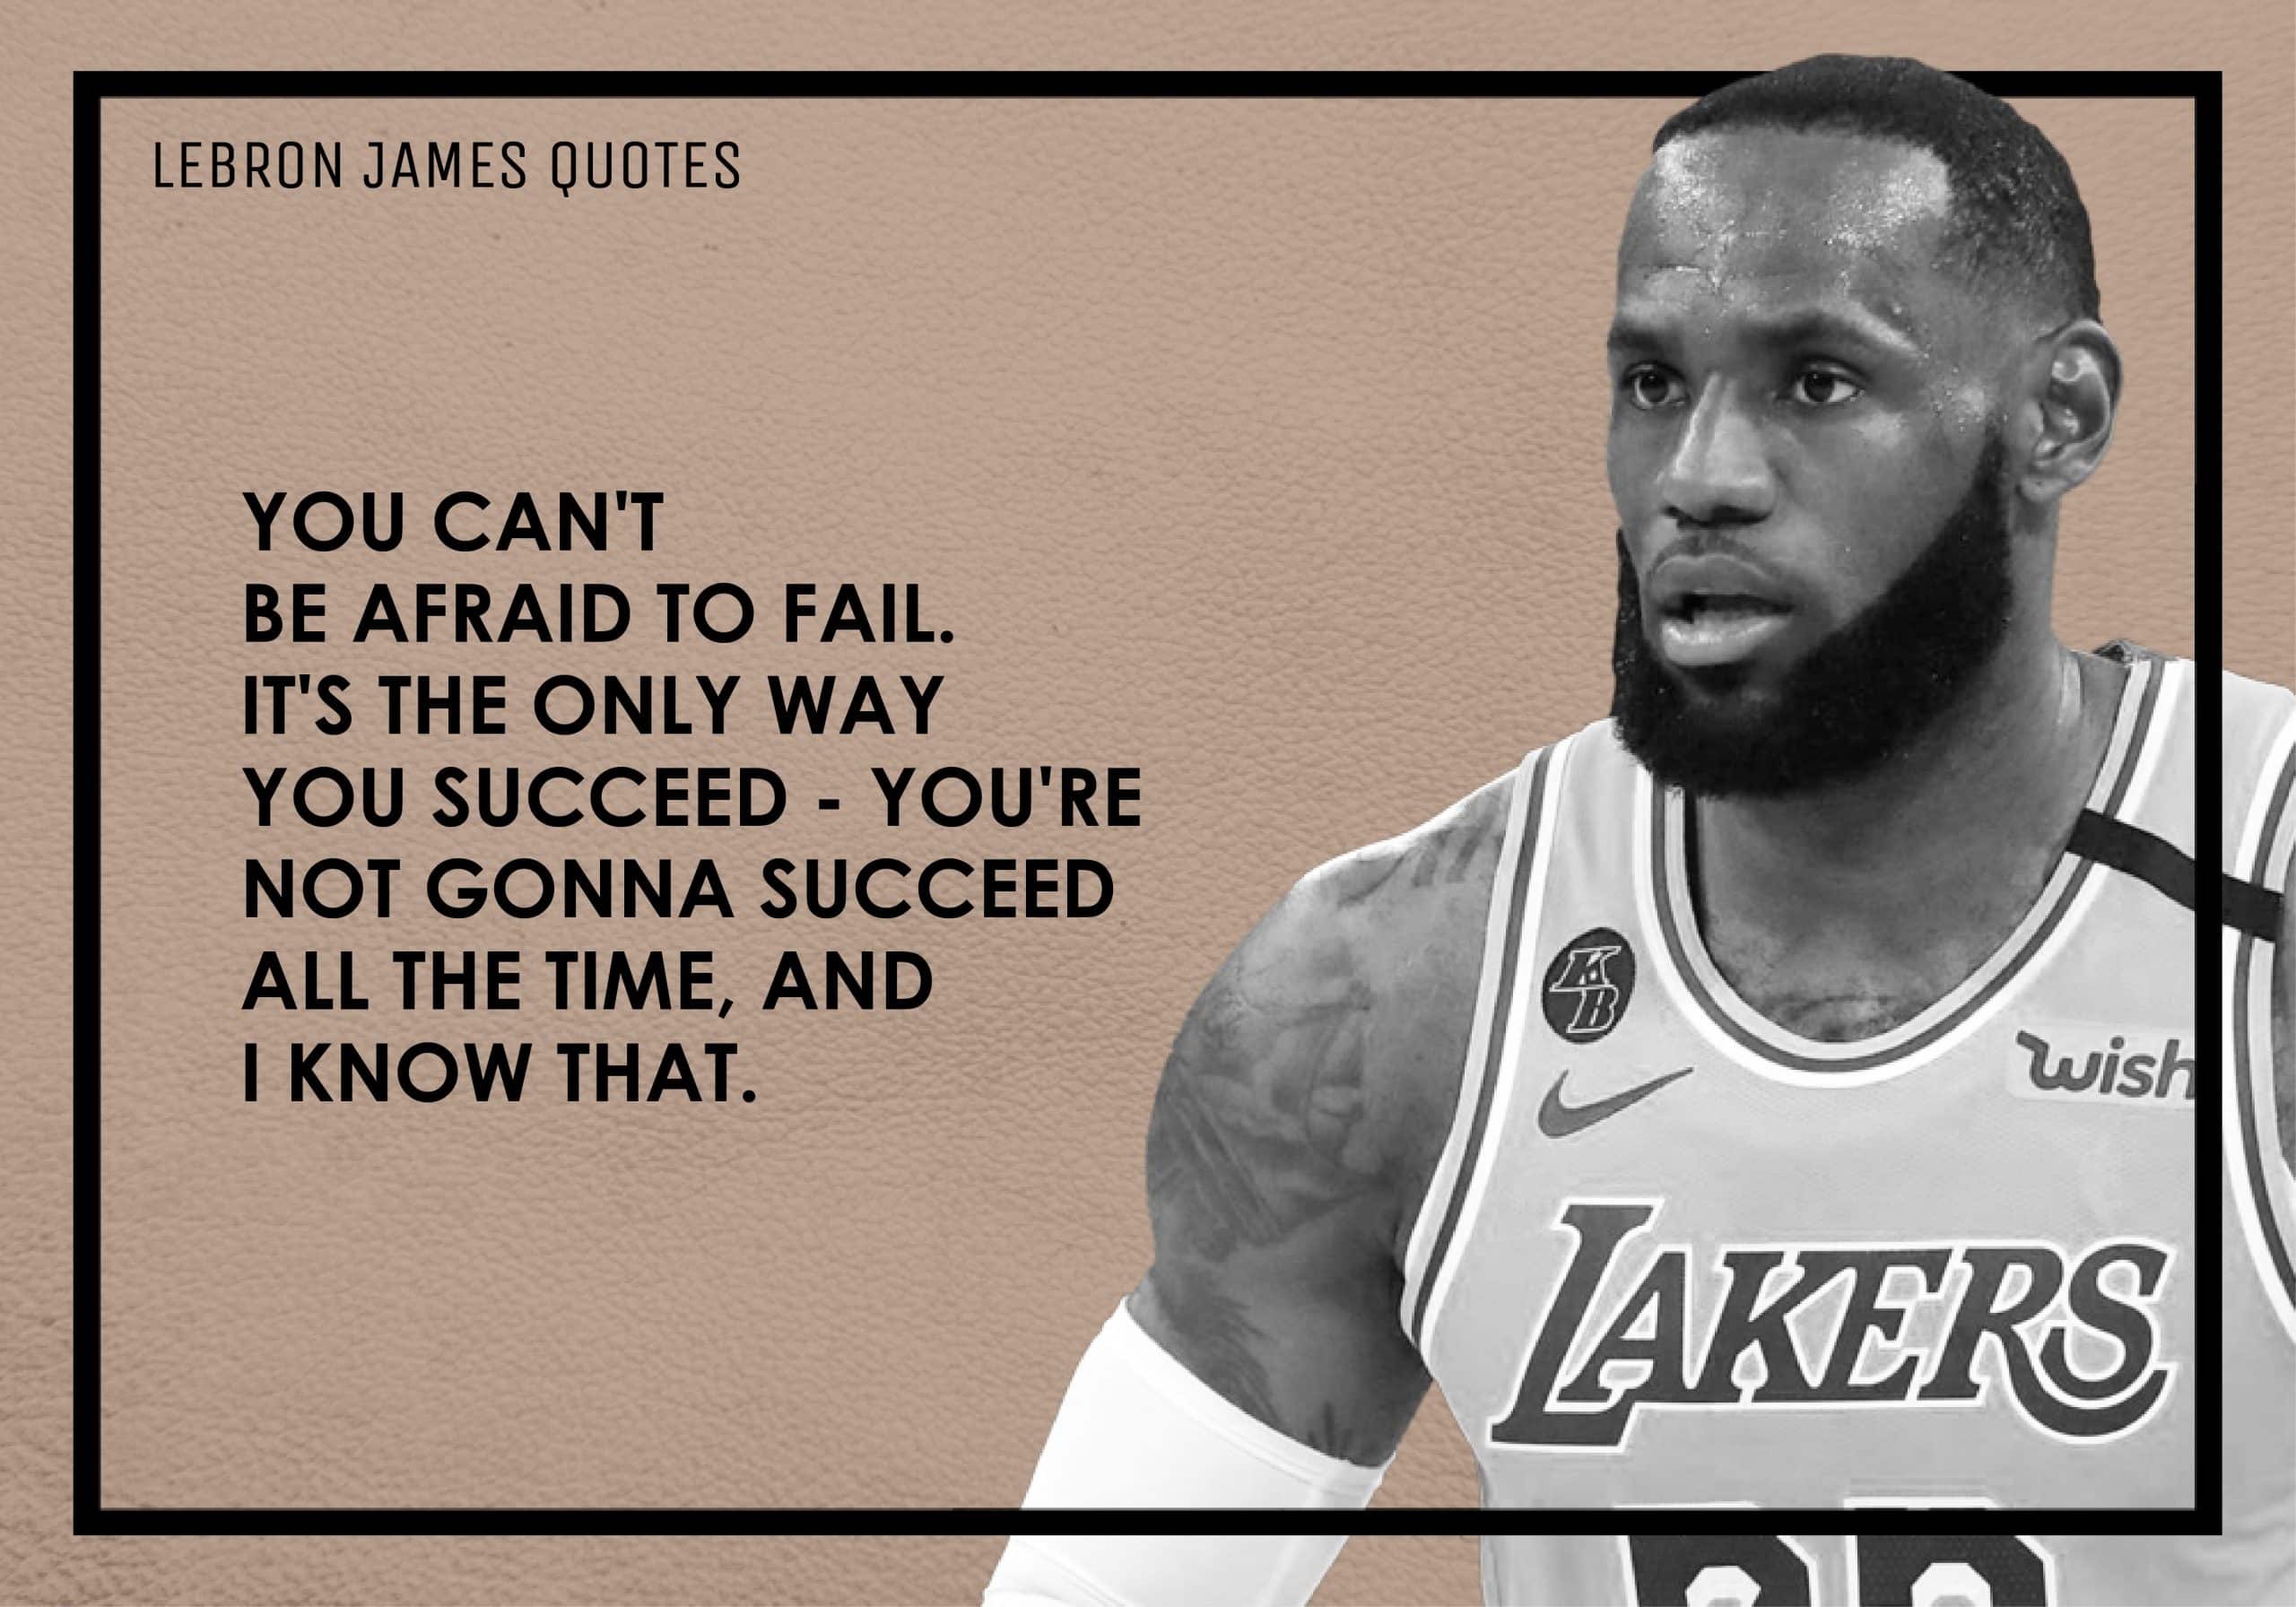 LeBron James Quotes 2 scaled 2